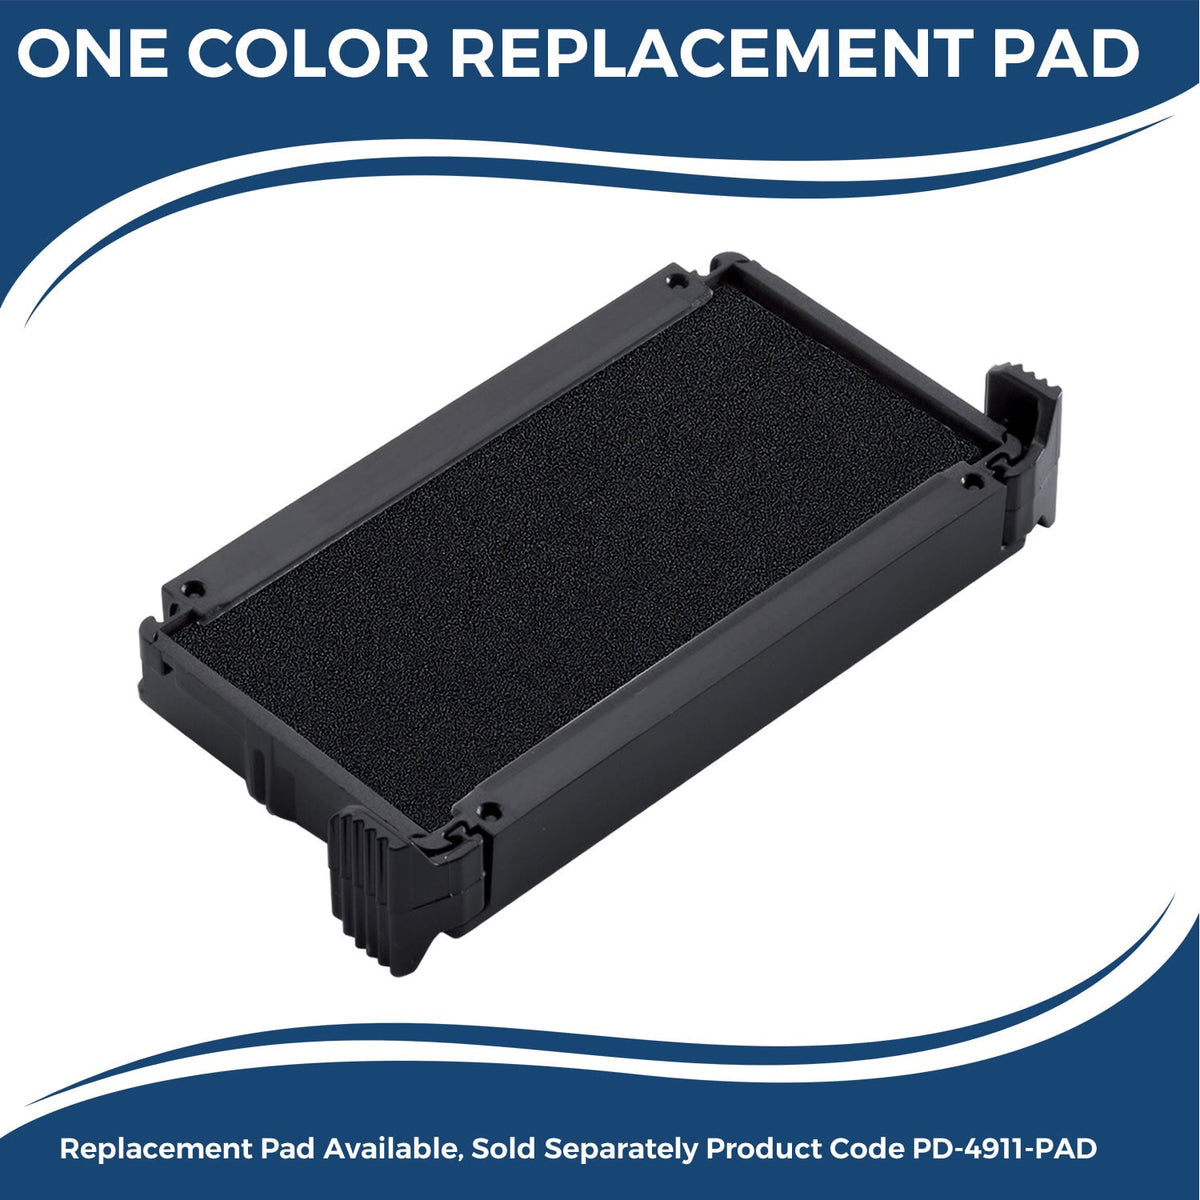 Replacement Pad for Self-Inking Muestra Stamp